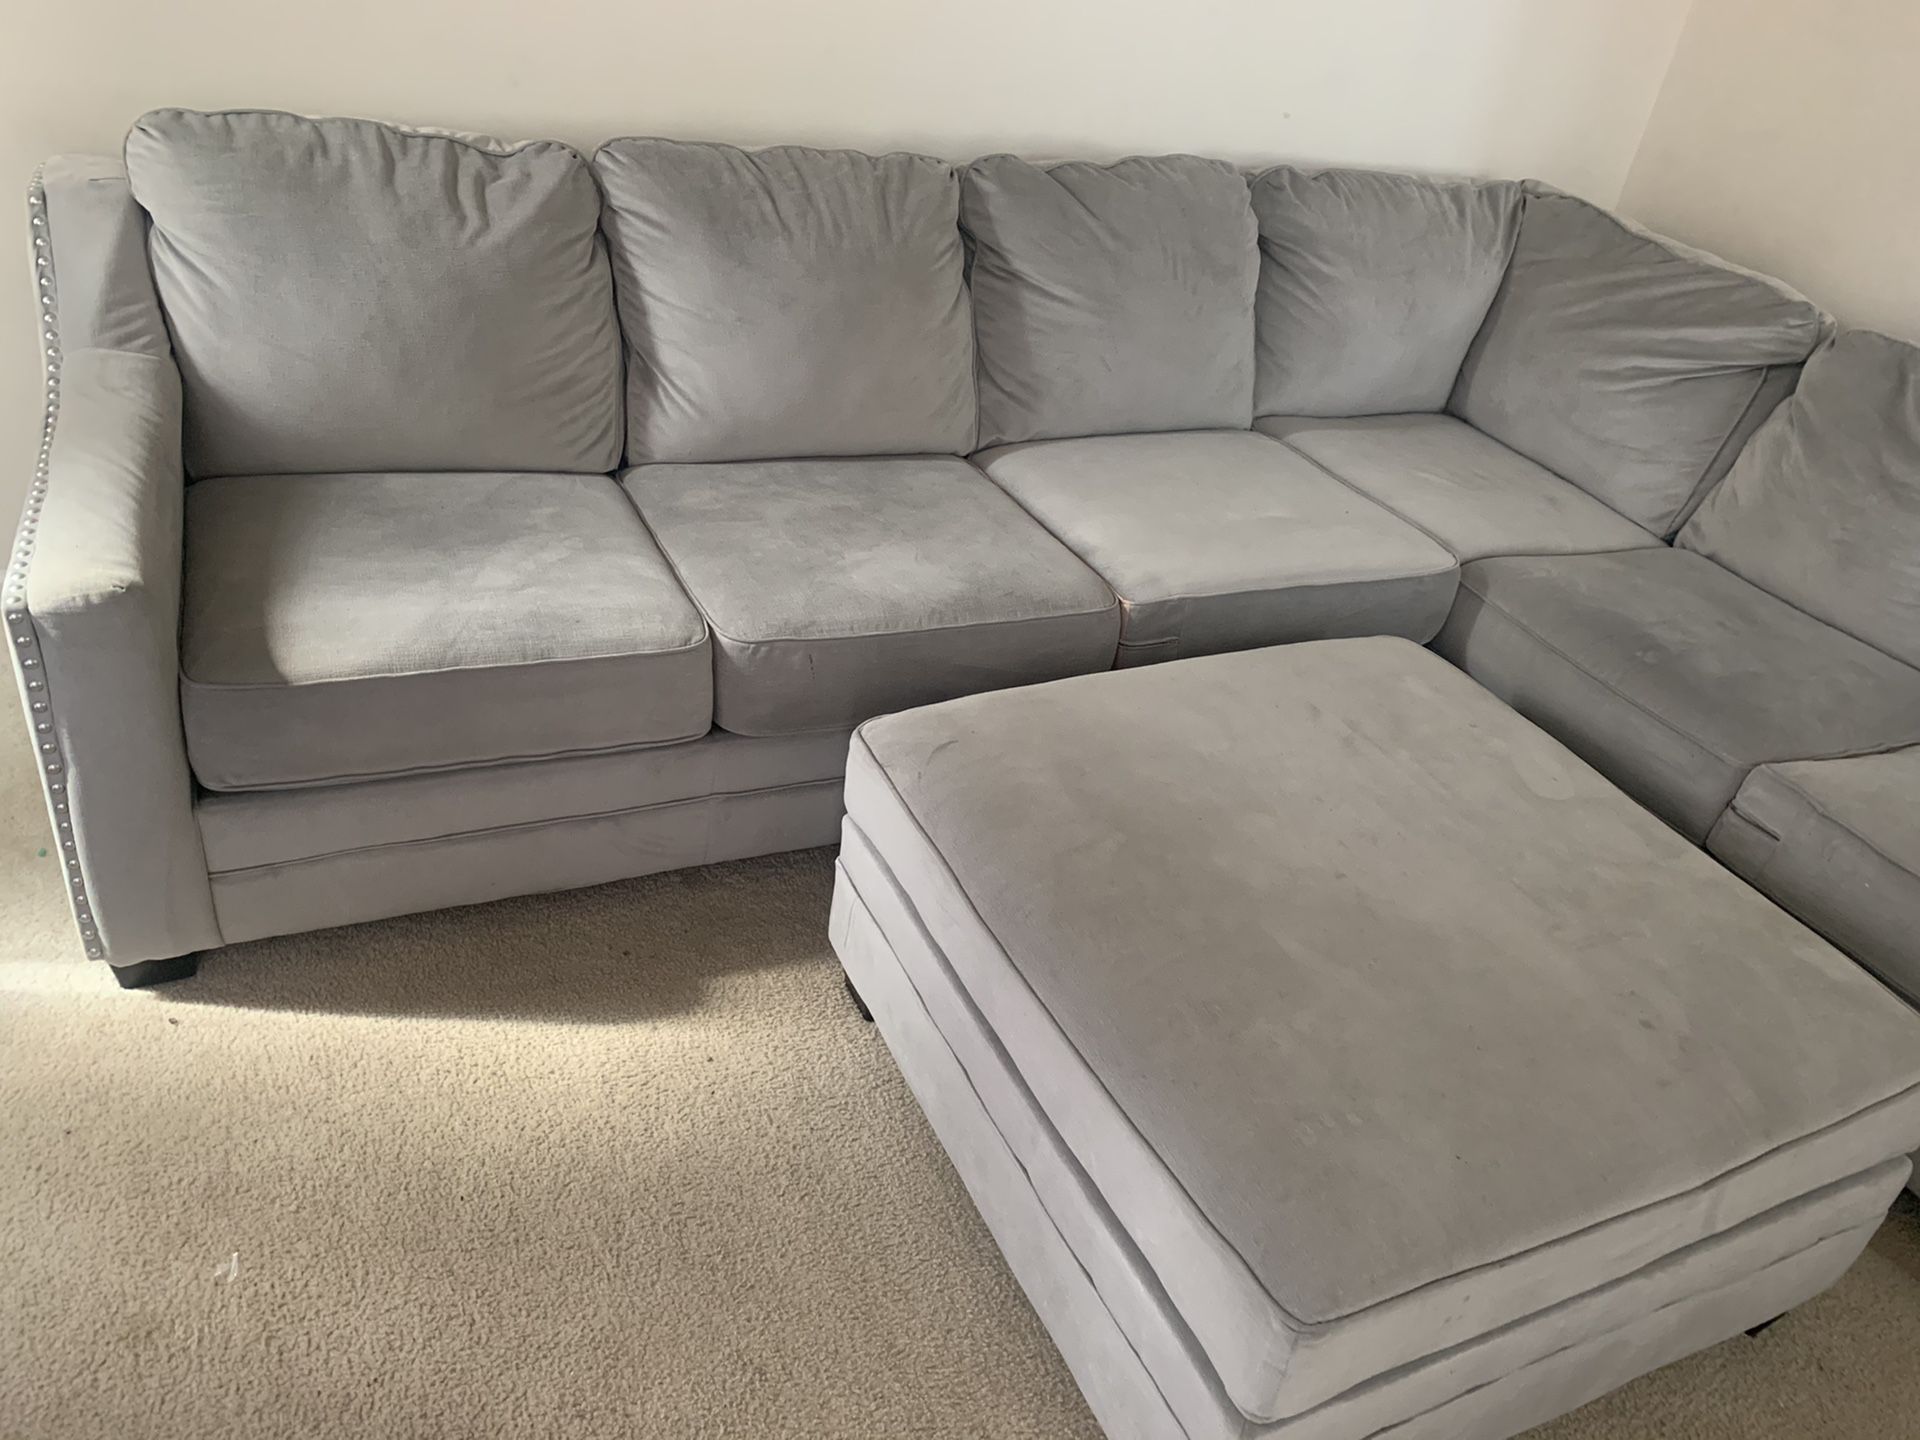 Lovely gray sectional $450 (Already discounted to sell fast)